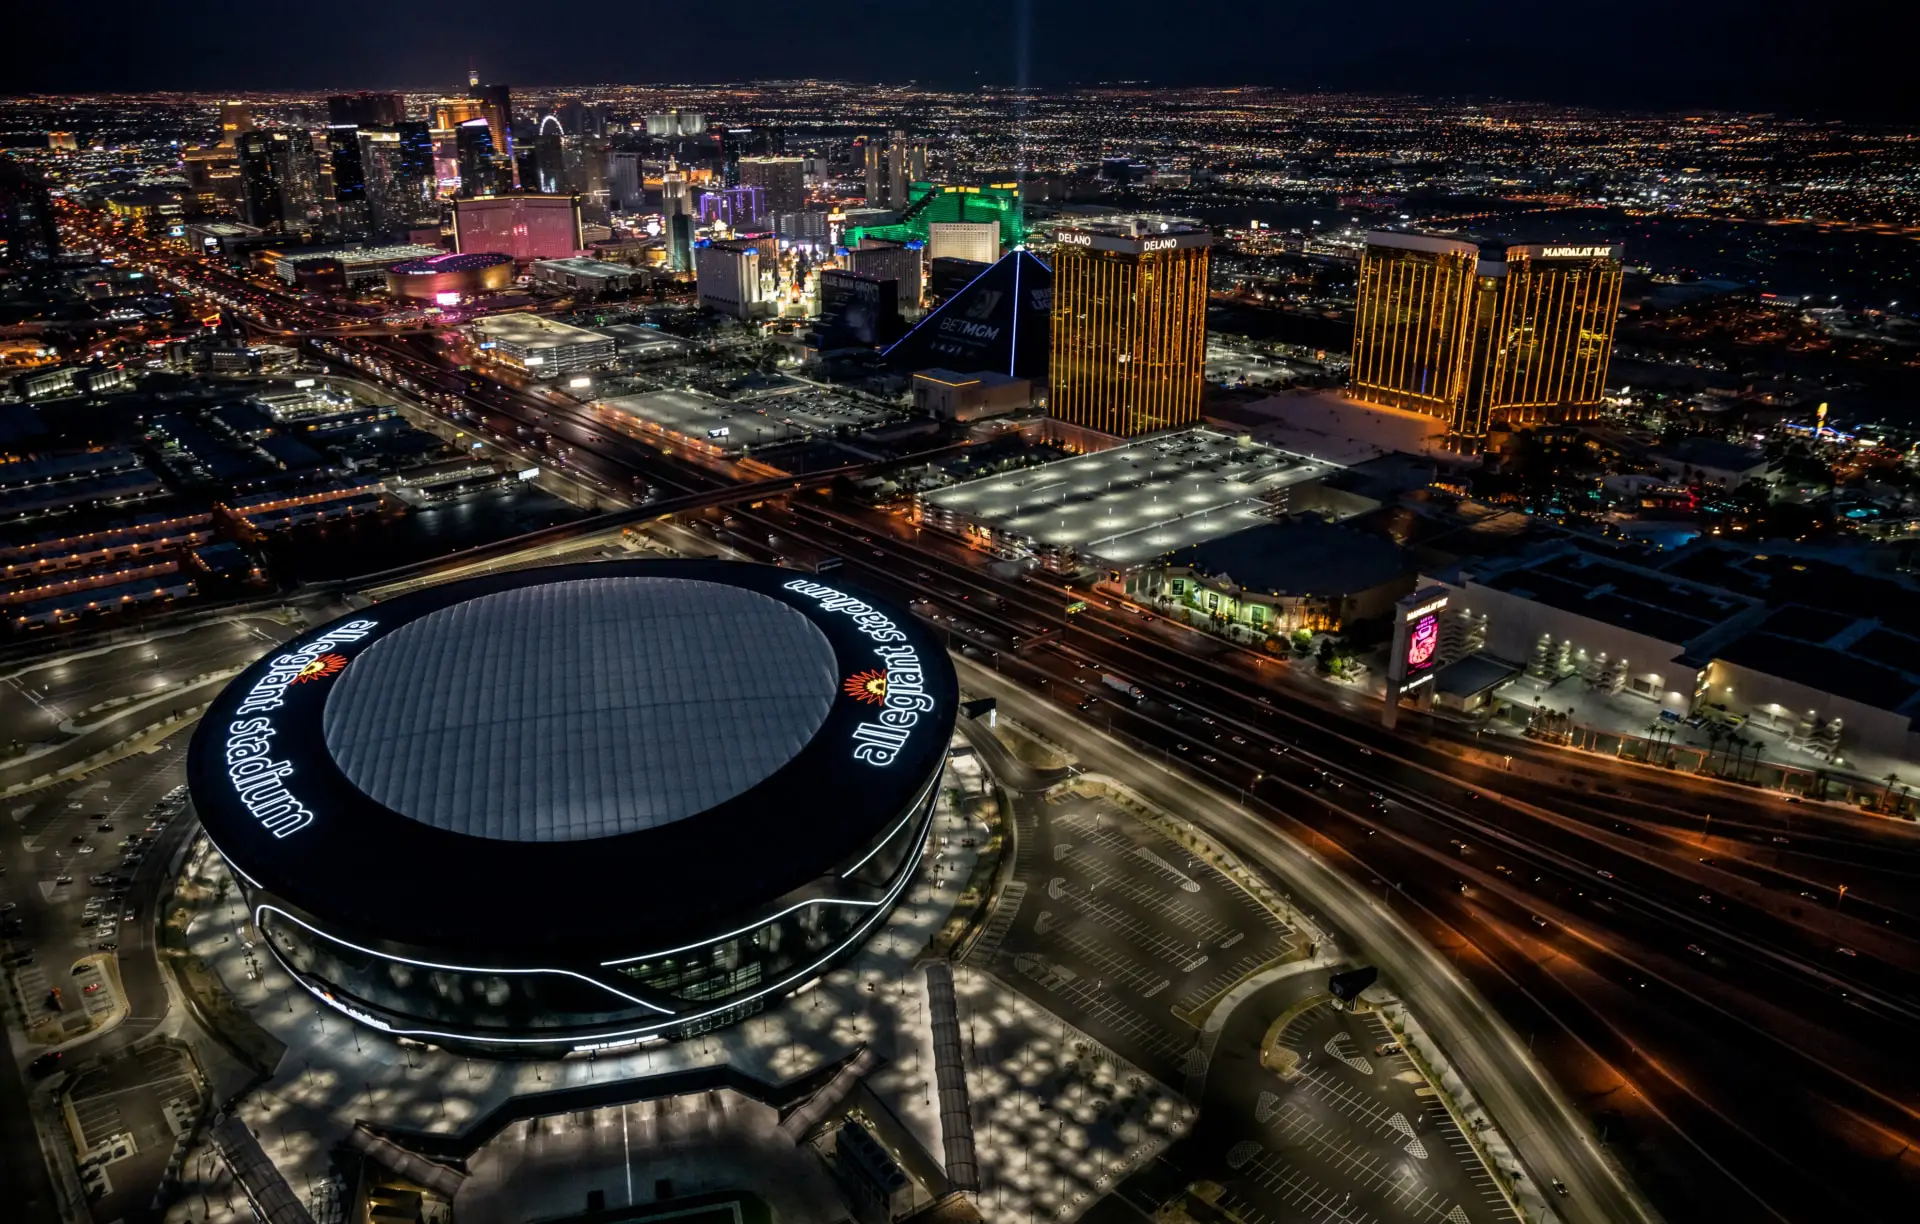 Las Vegas Nevada is the new home to Allegiant Stadium, and the home of the Raiders NFL team.